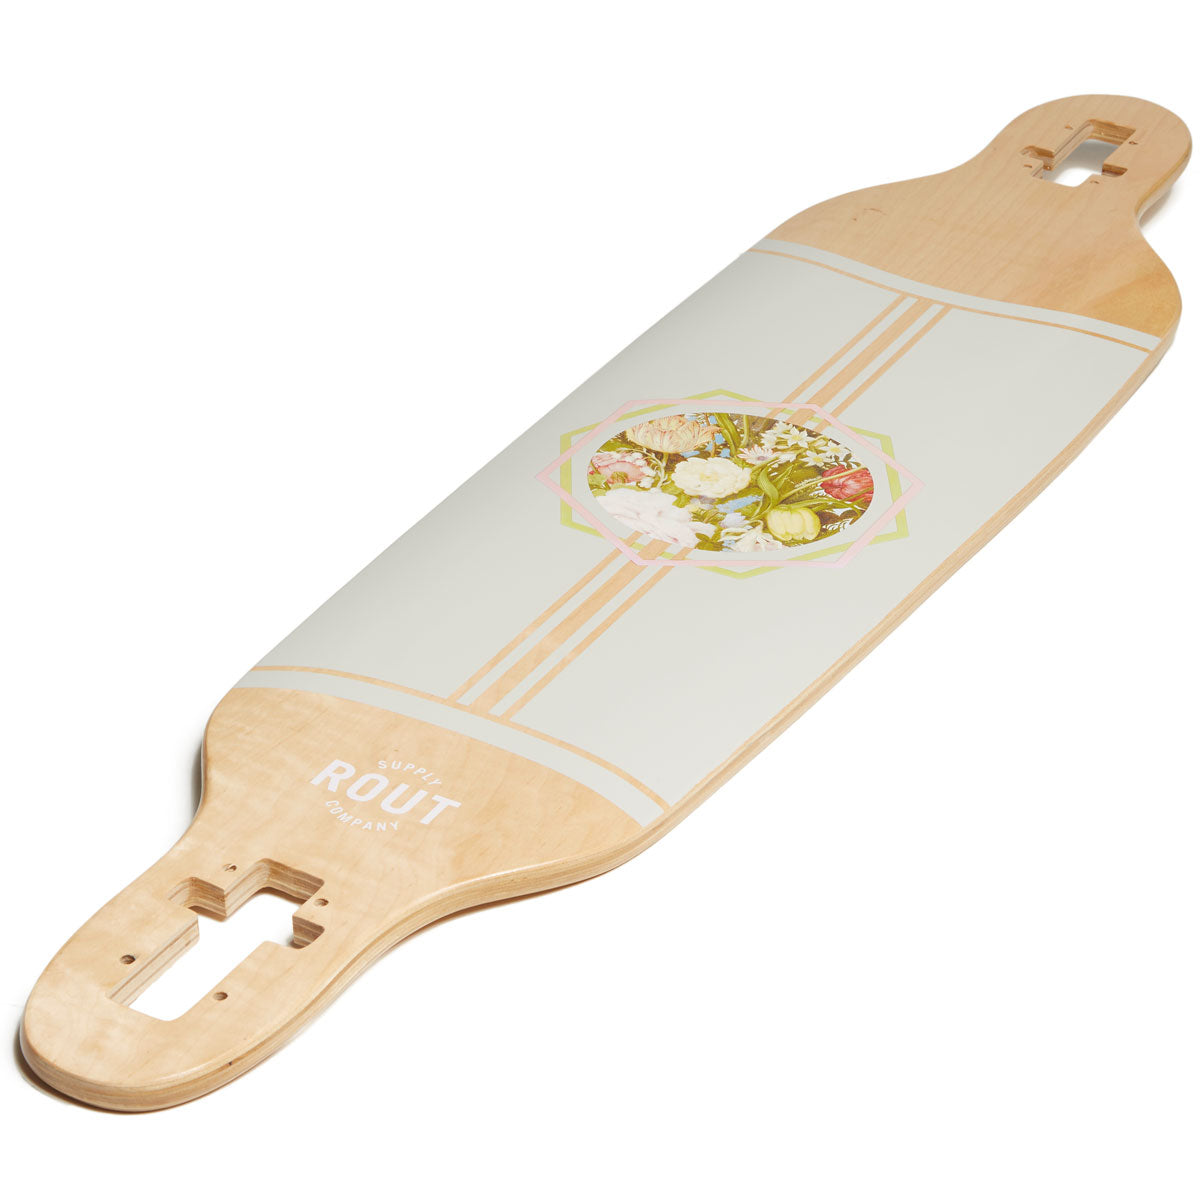 Rout Floral Drop-Thru Longboard Complete image 4